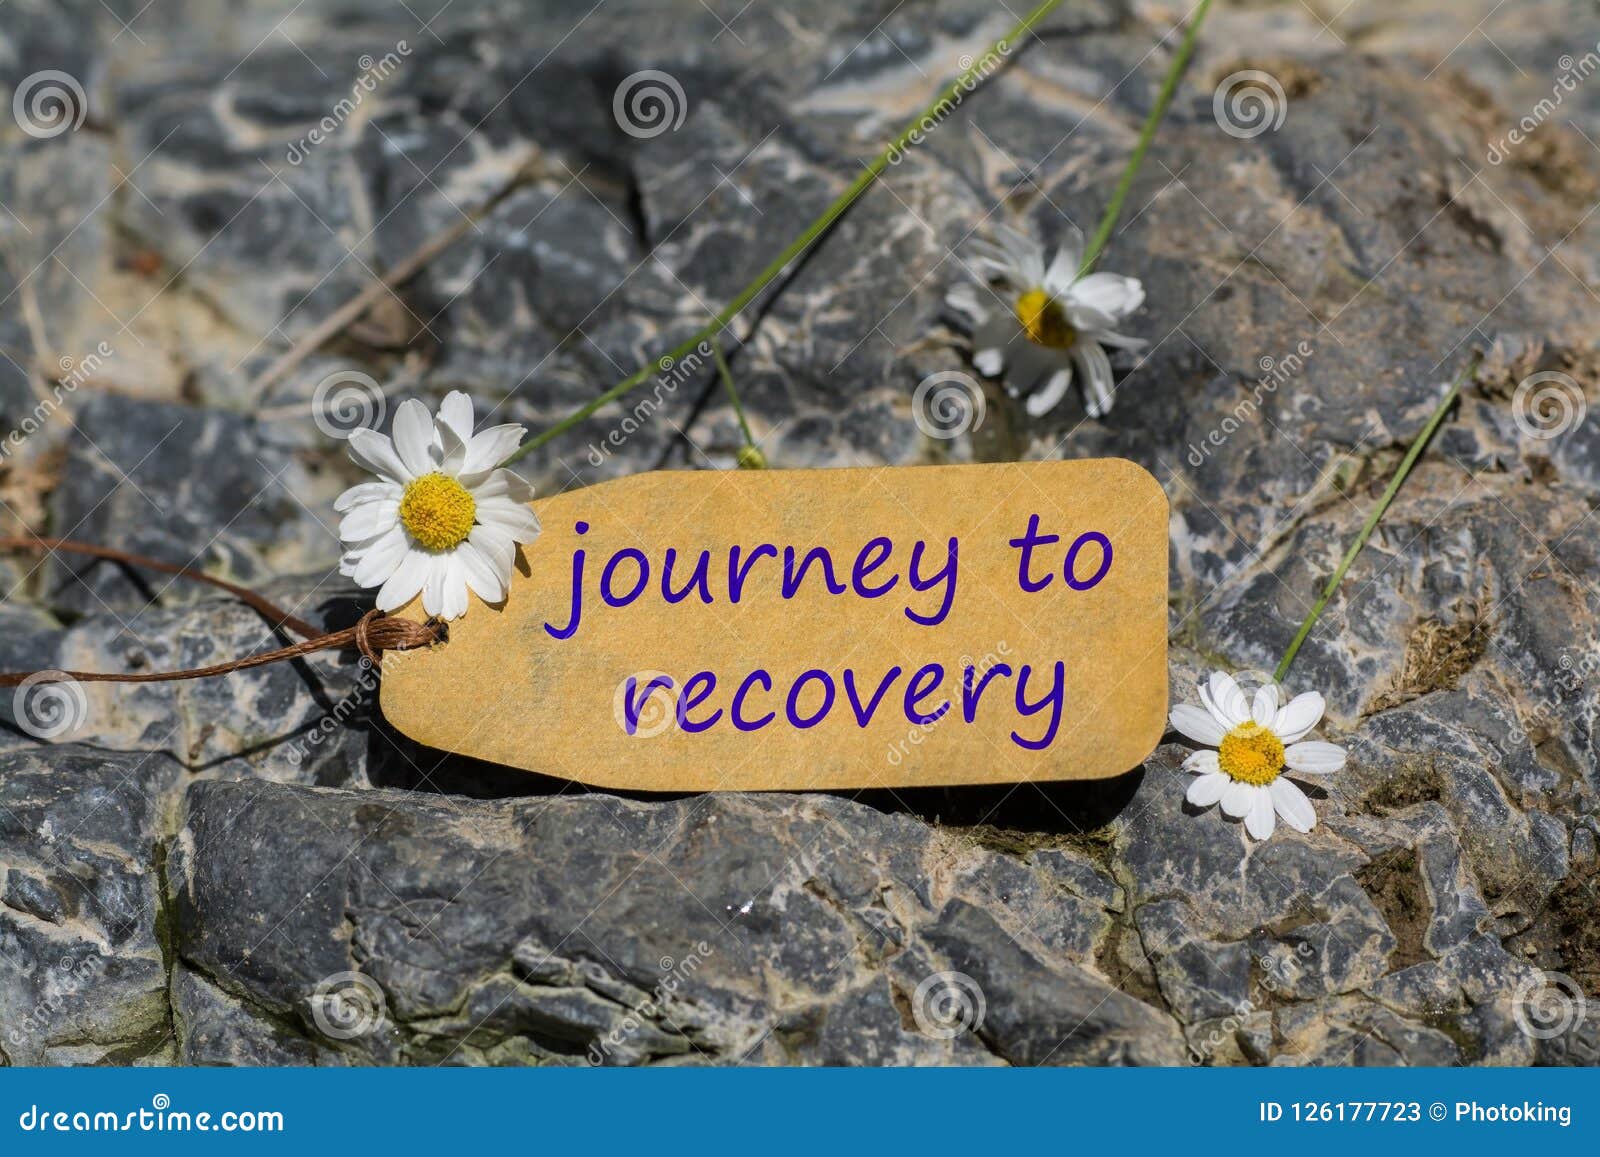 journey to recovery label